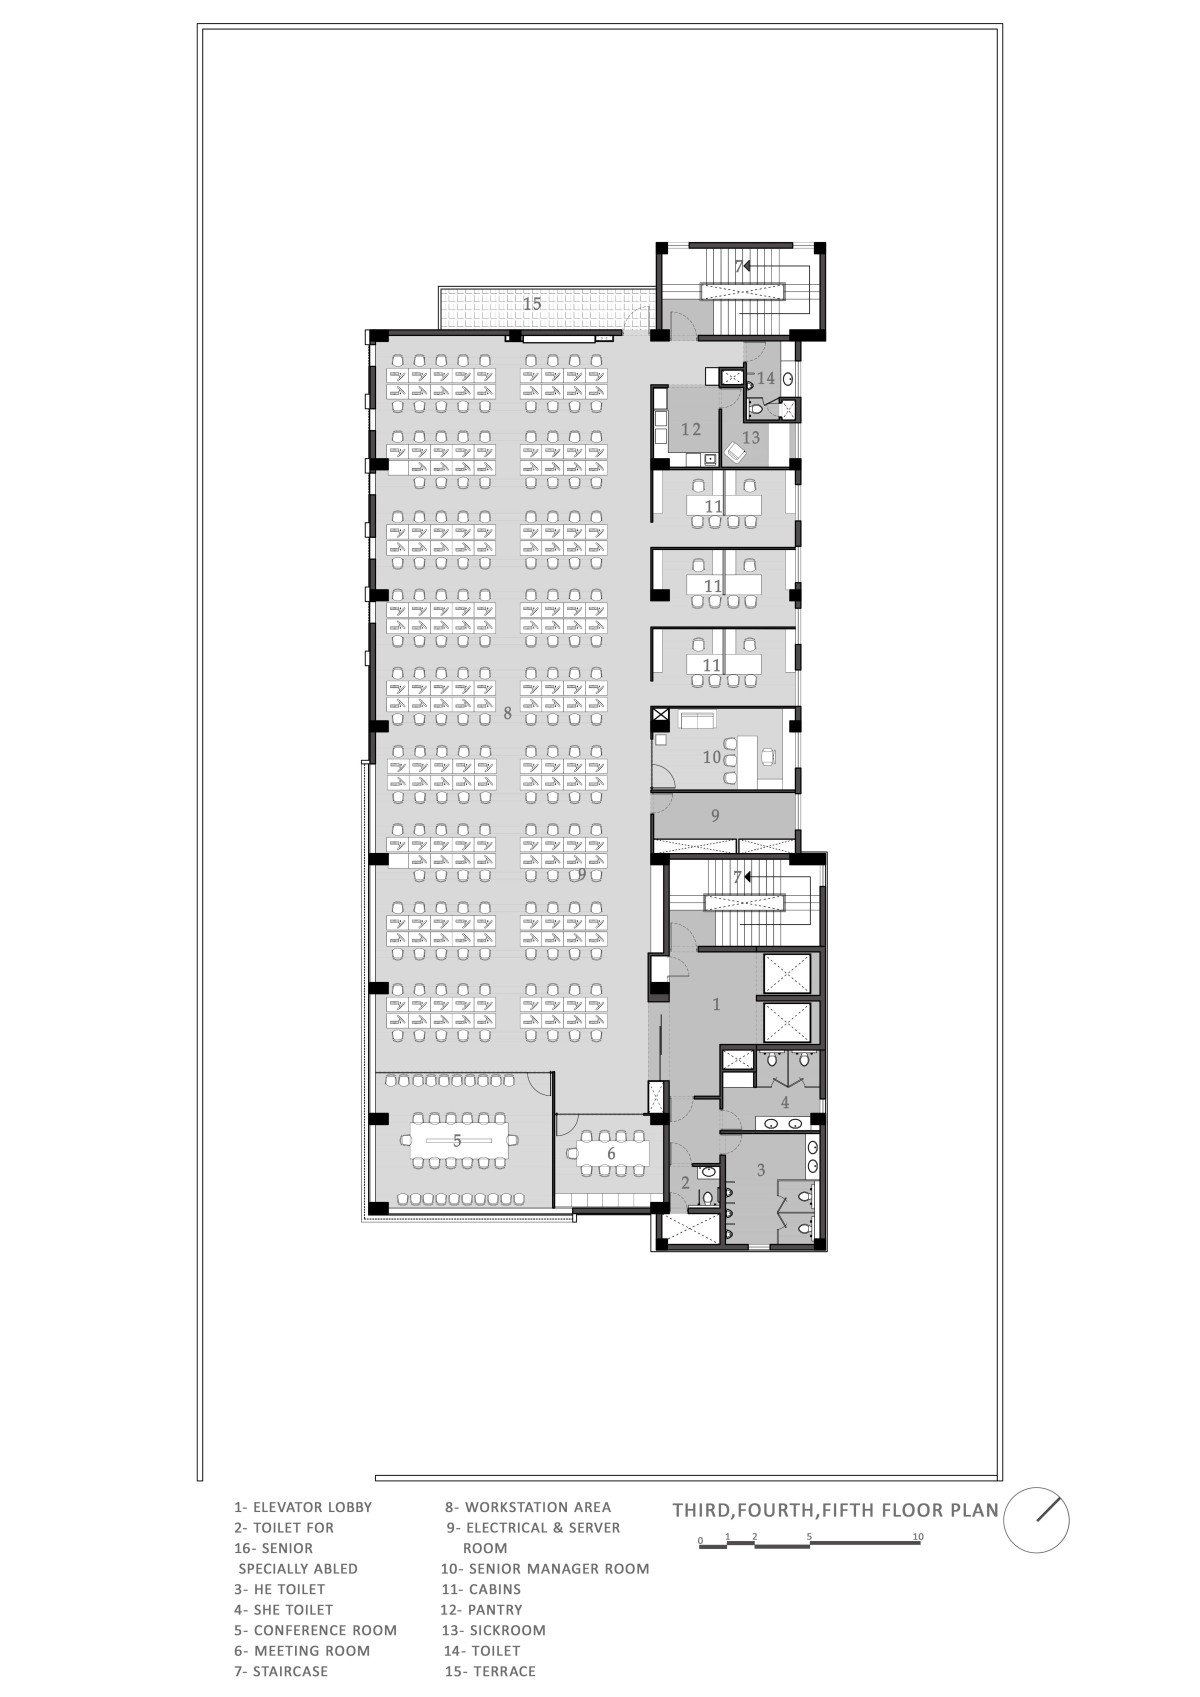 Third to Fifth floor plan of Outline by Design Three Sixty